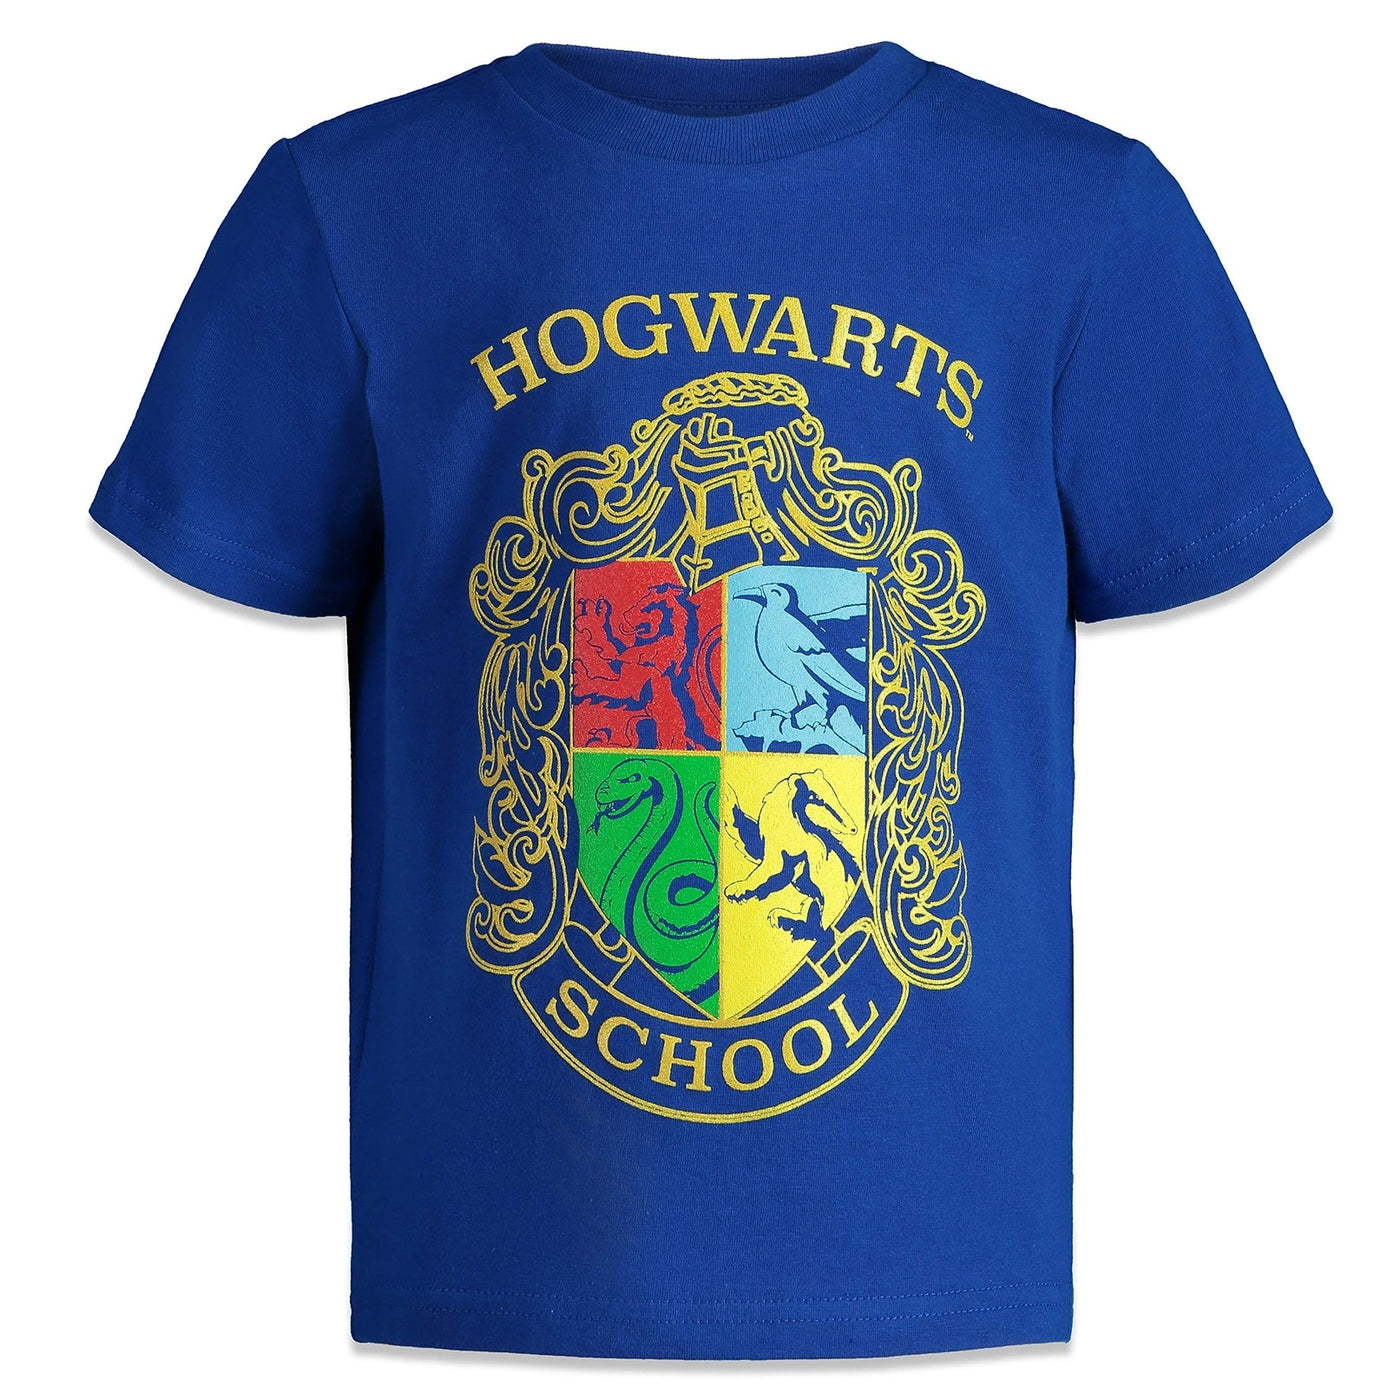 Harry Potter 3 Pack Graphic T-Shirts - imagikids